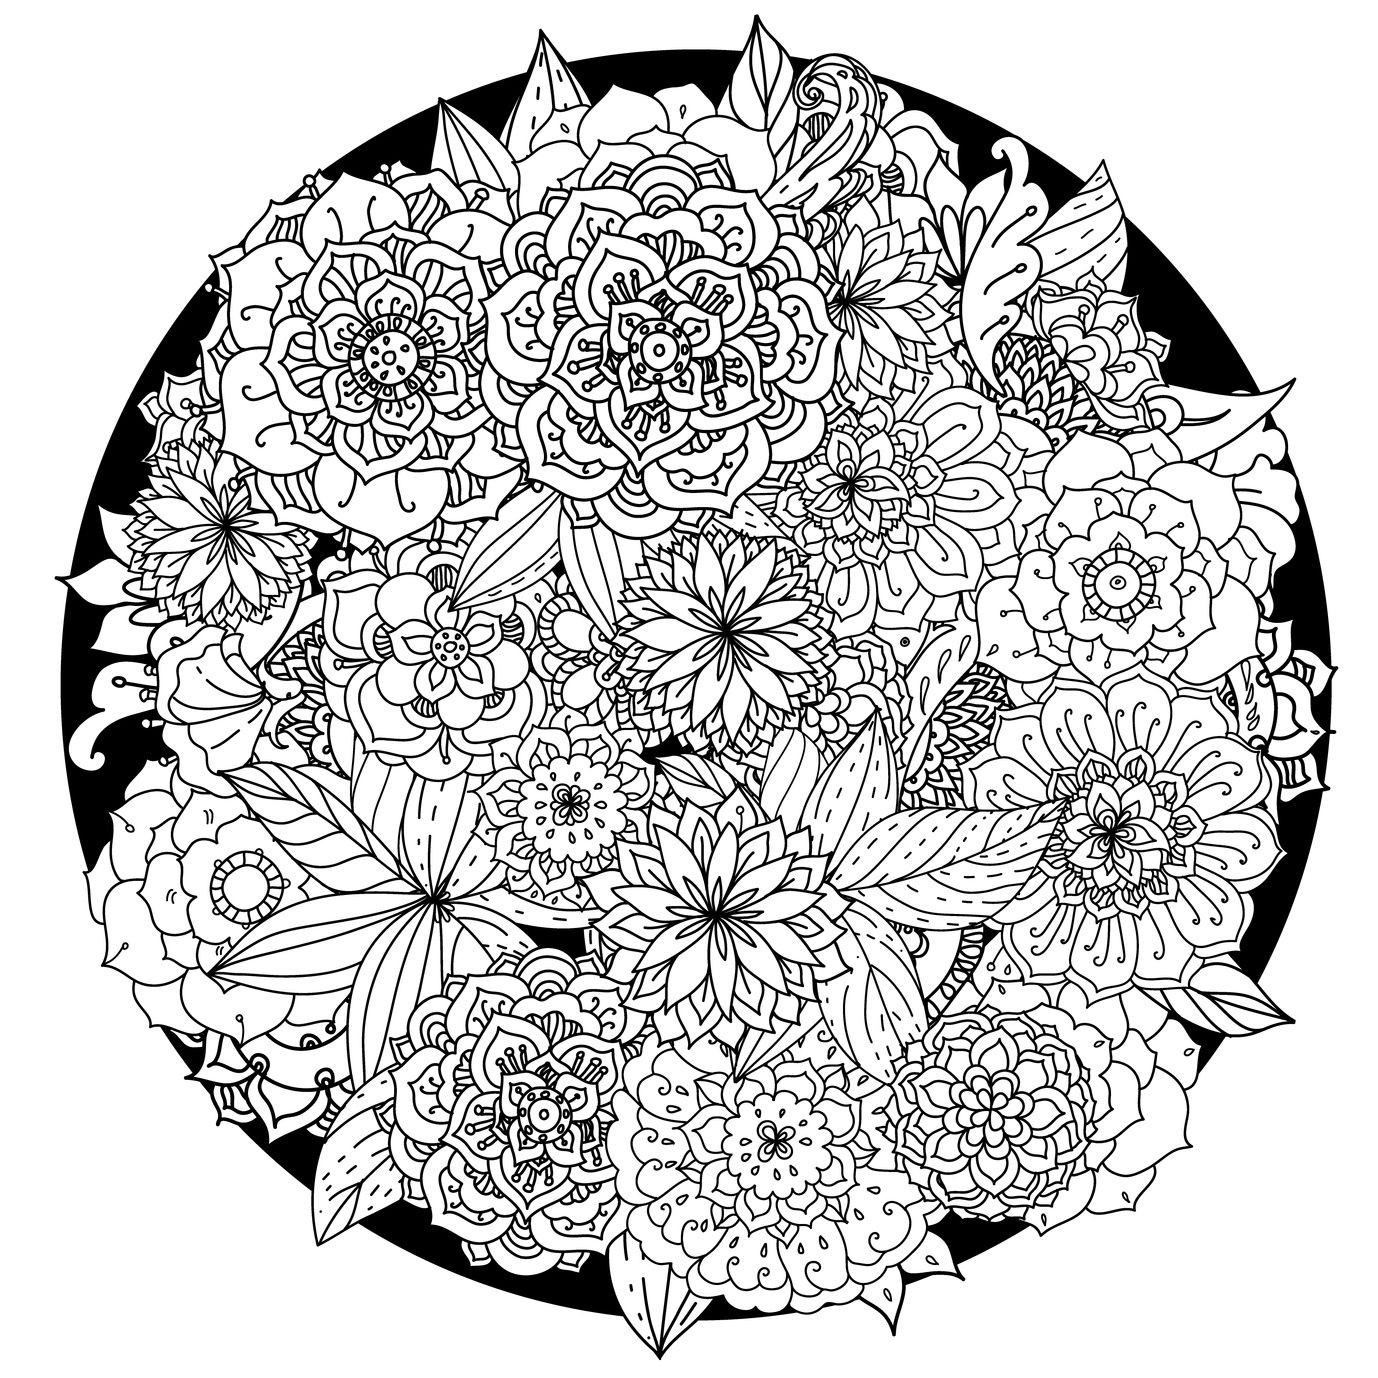 Free Printable Mandala Coloring Pages Adults
 These Printable Abstract Coloring Pages Relieve Stress And